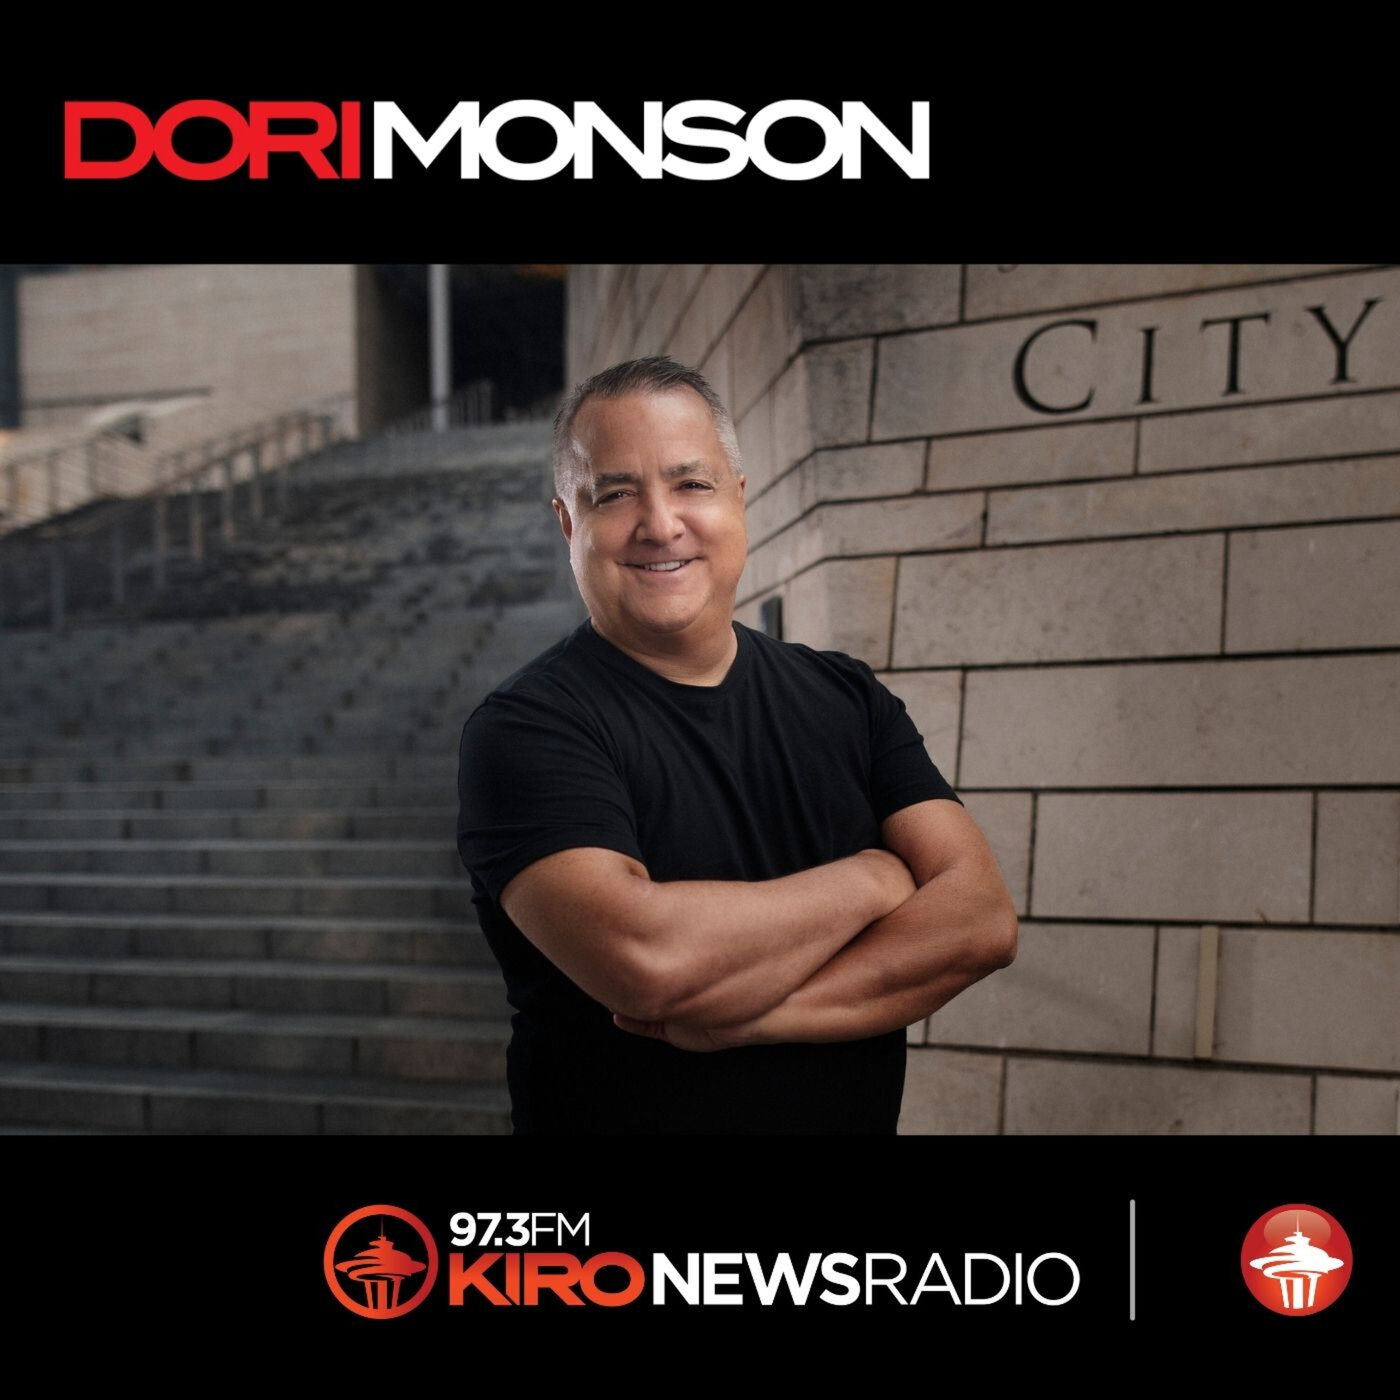 The Very Best of the Dori Monson Show, Day 1: Hour 3